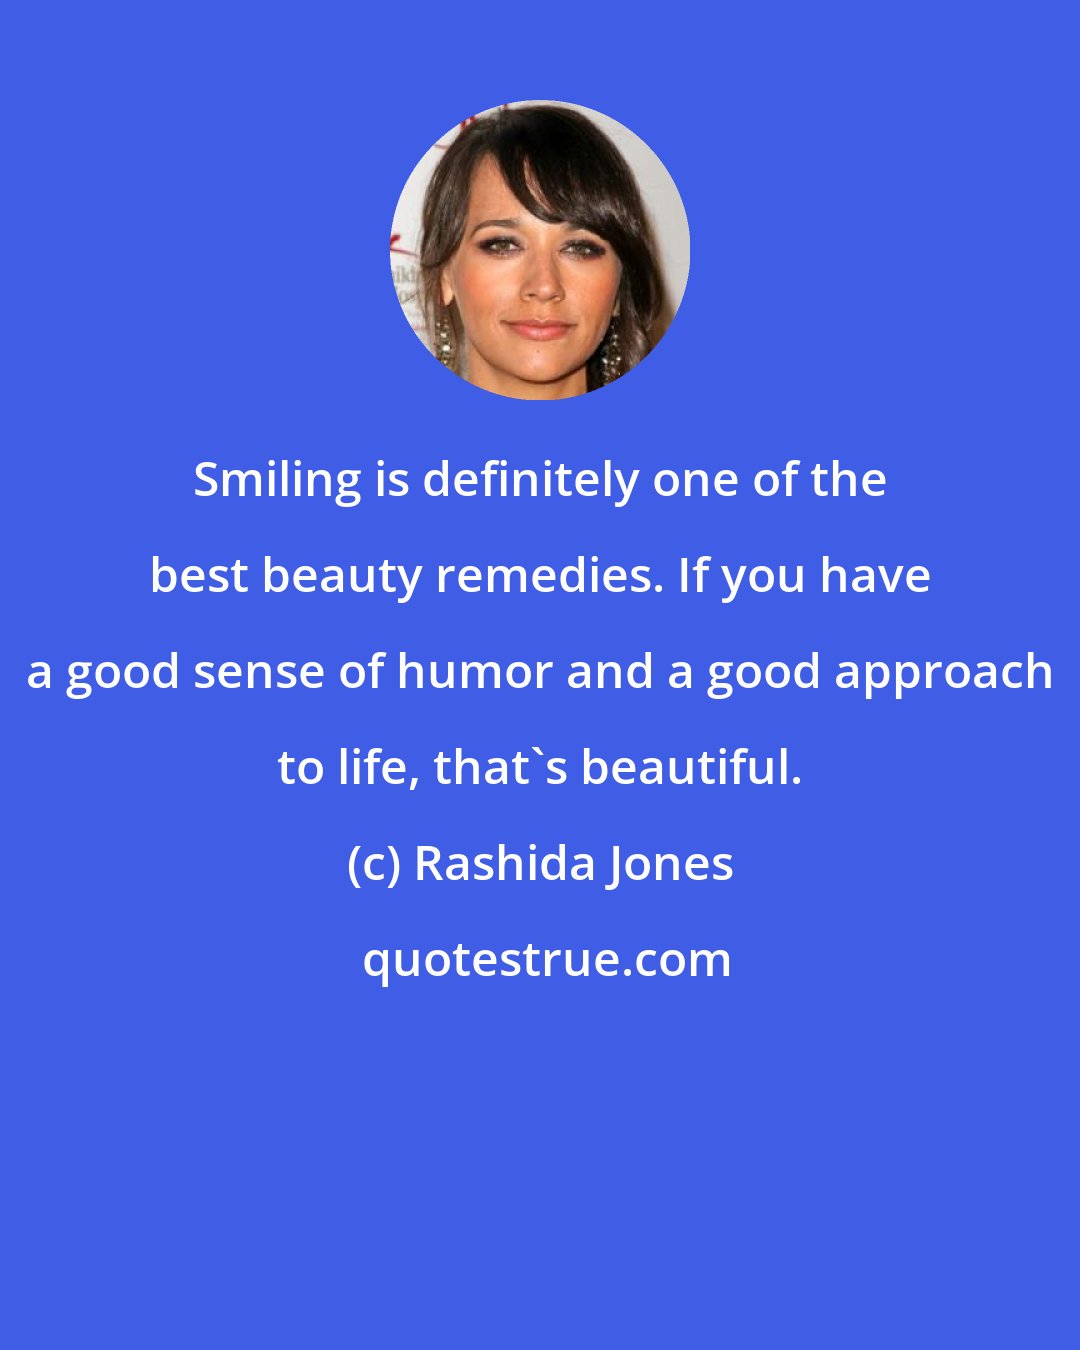 Rashida Jones: Smiling is definitely one of the best beauty remedies. If you have a good sense of humor and a good approach to life, that's beautiful.